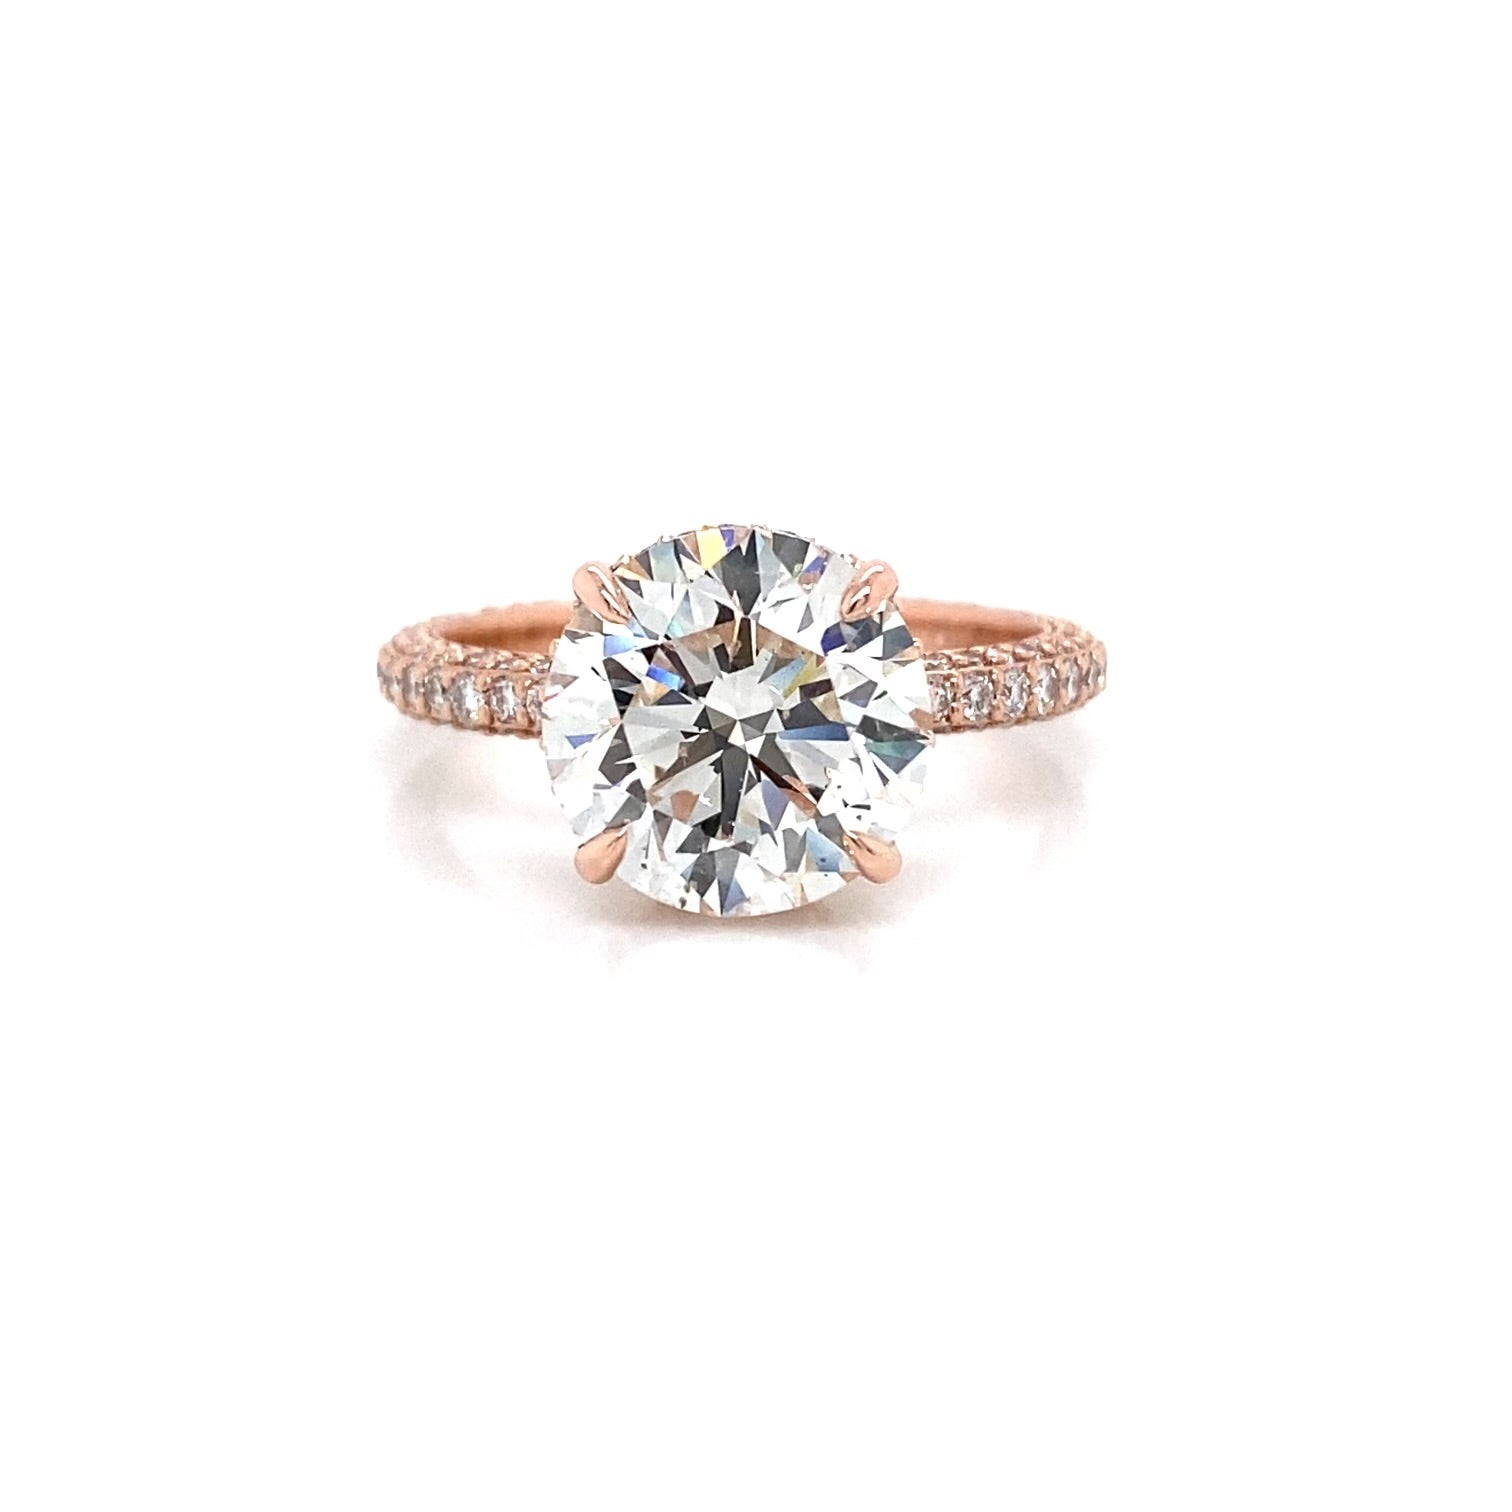 ARIELLE ENGAGEMENT RING